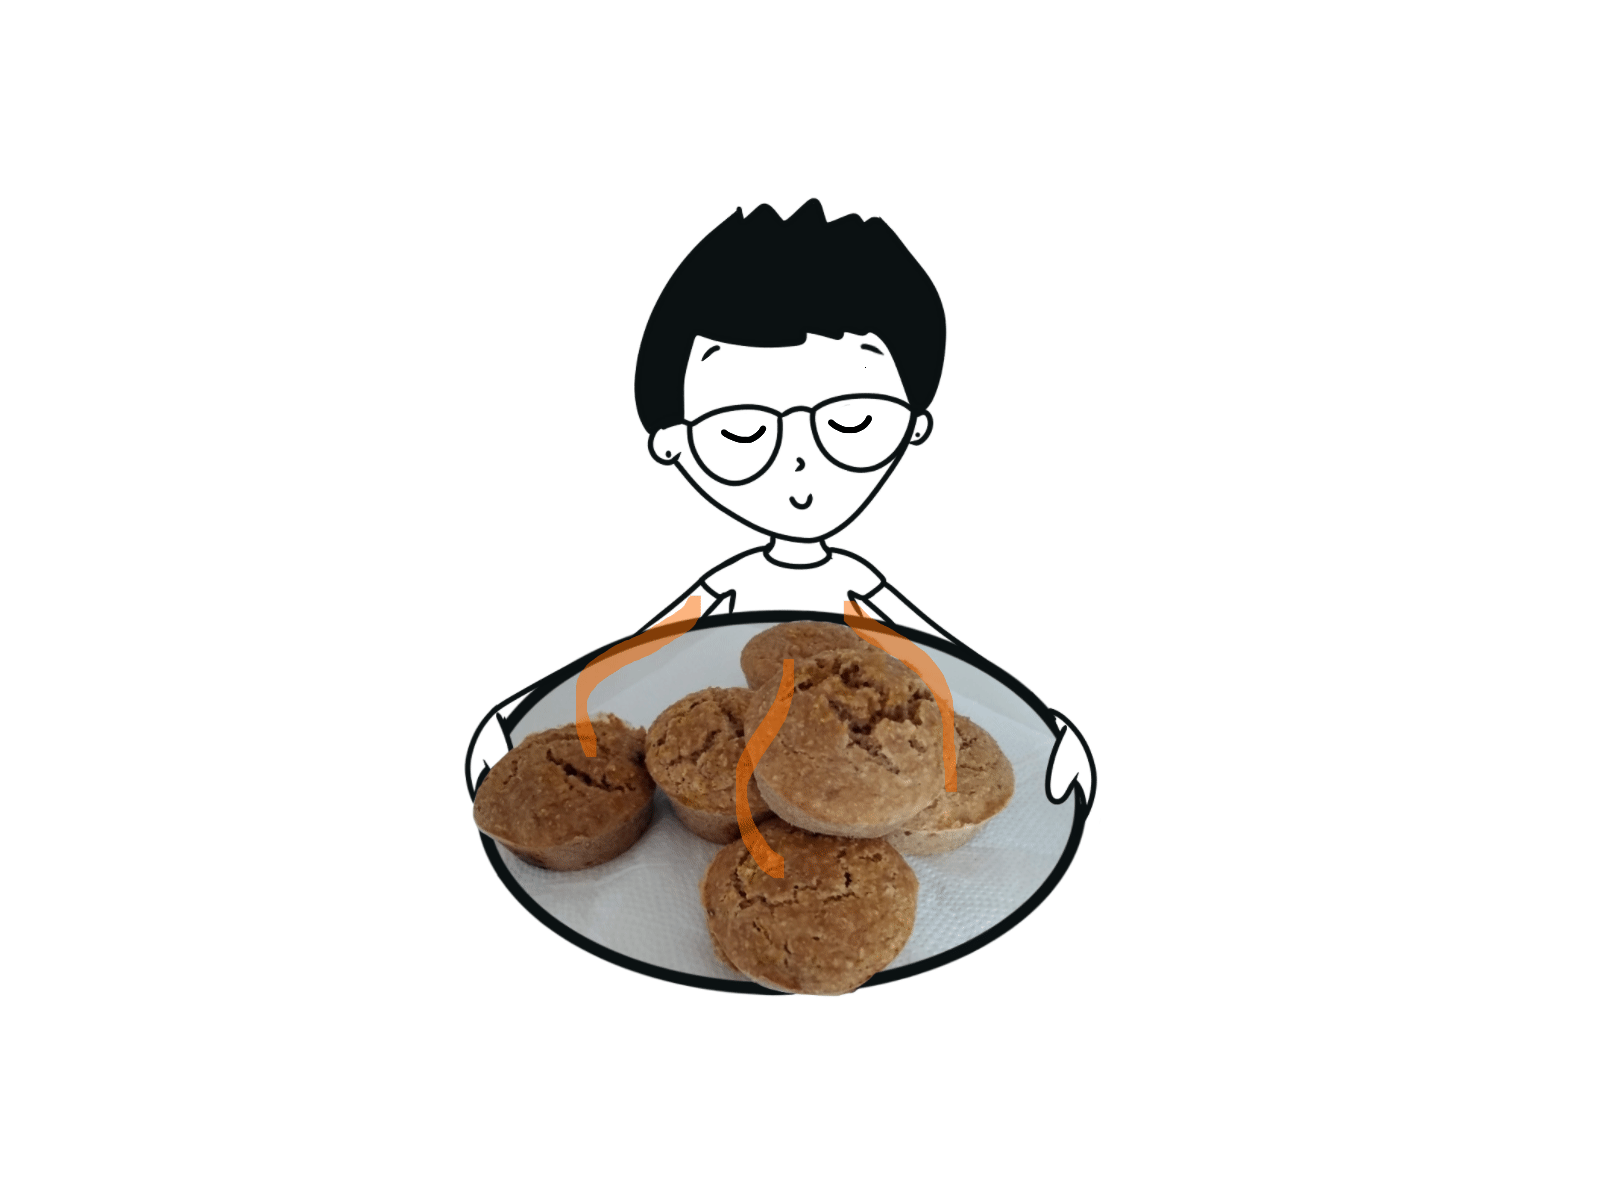 Love this smell animation bread cake flipaclip hand drawn illustration orange smell whole food